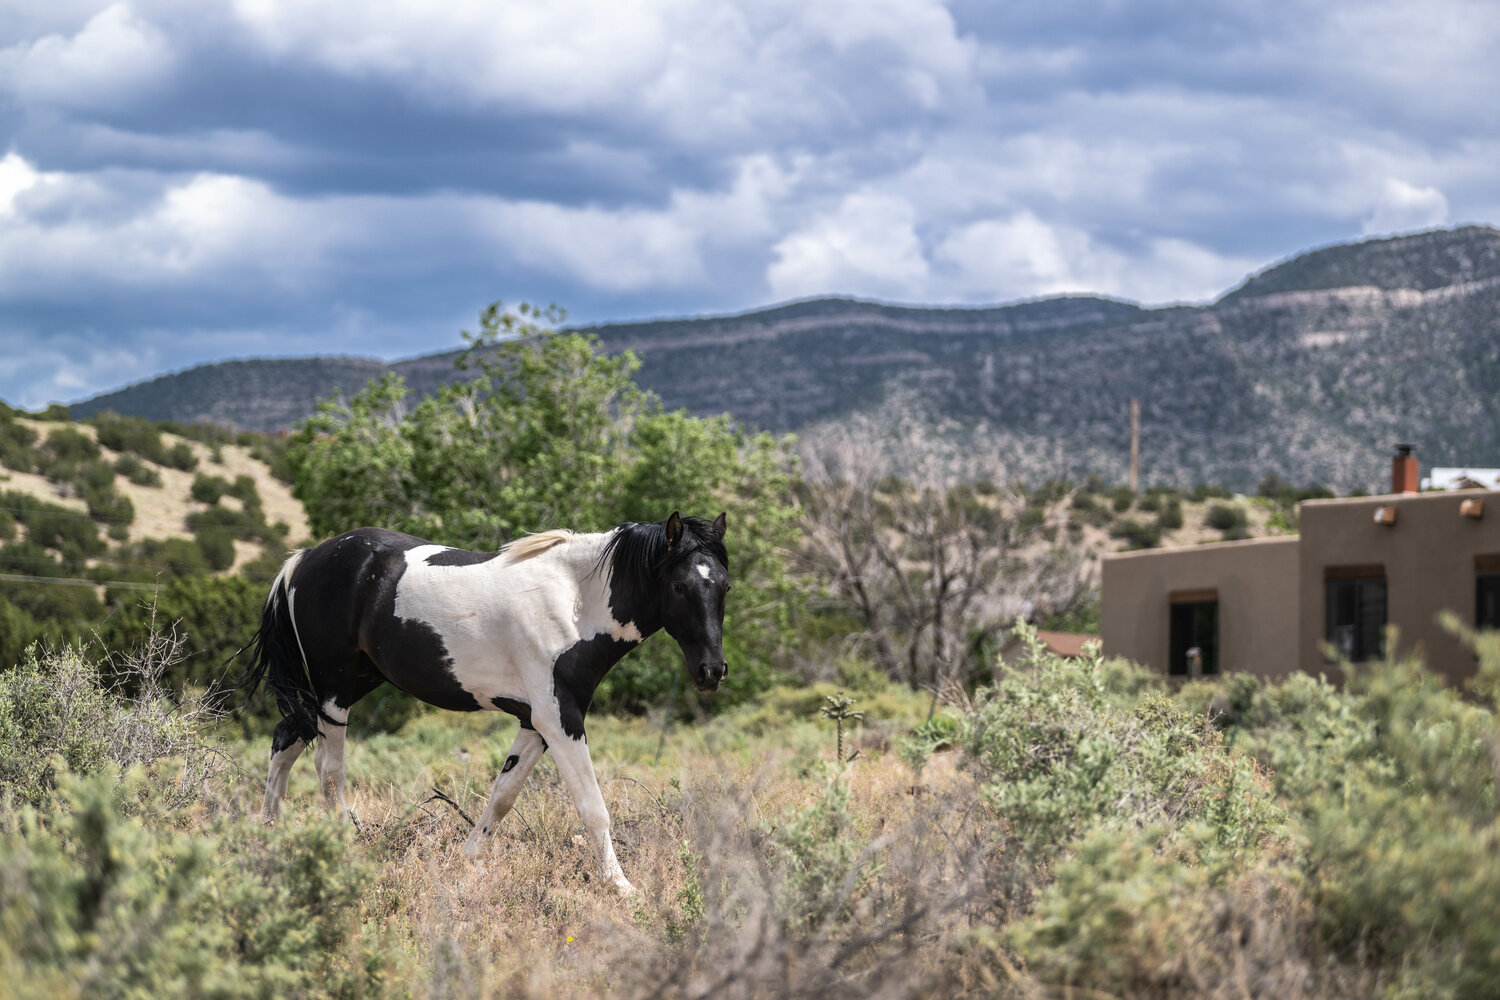 Free-roaming horses sometimes wander into Placitas neighborhoods in search of handouts. Law enforcement says it becomes a safety problem when the horses go onto roadways. (Roberto E. Rosales/For Sandoval Signpost)